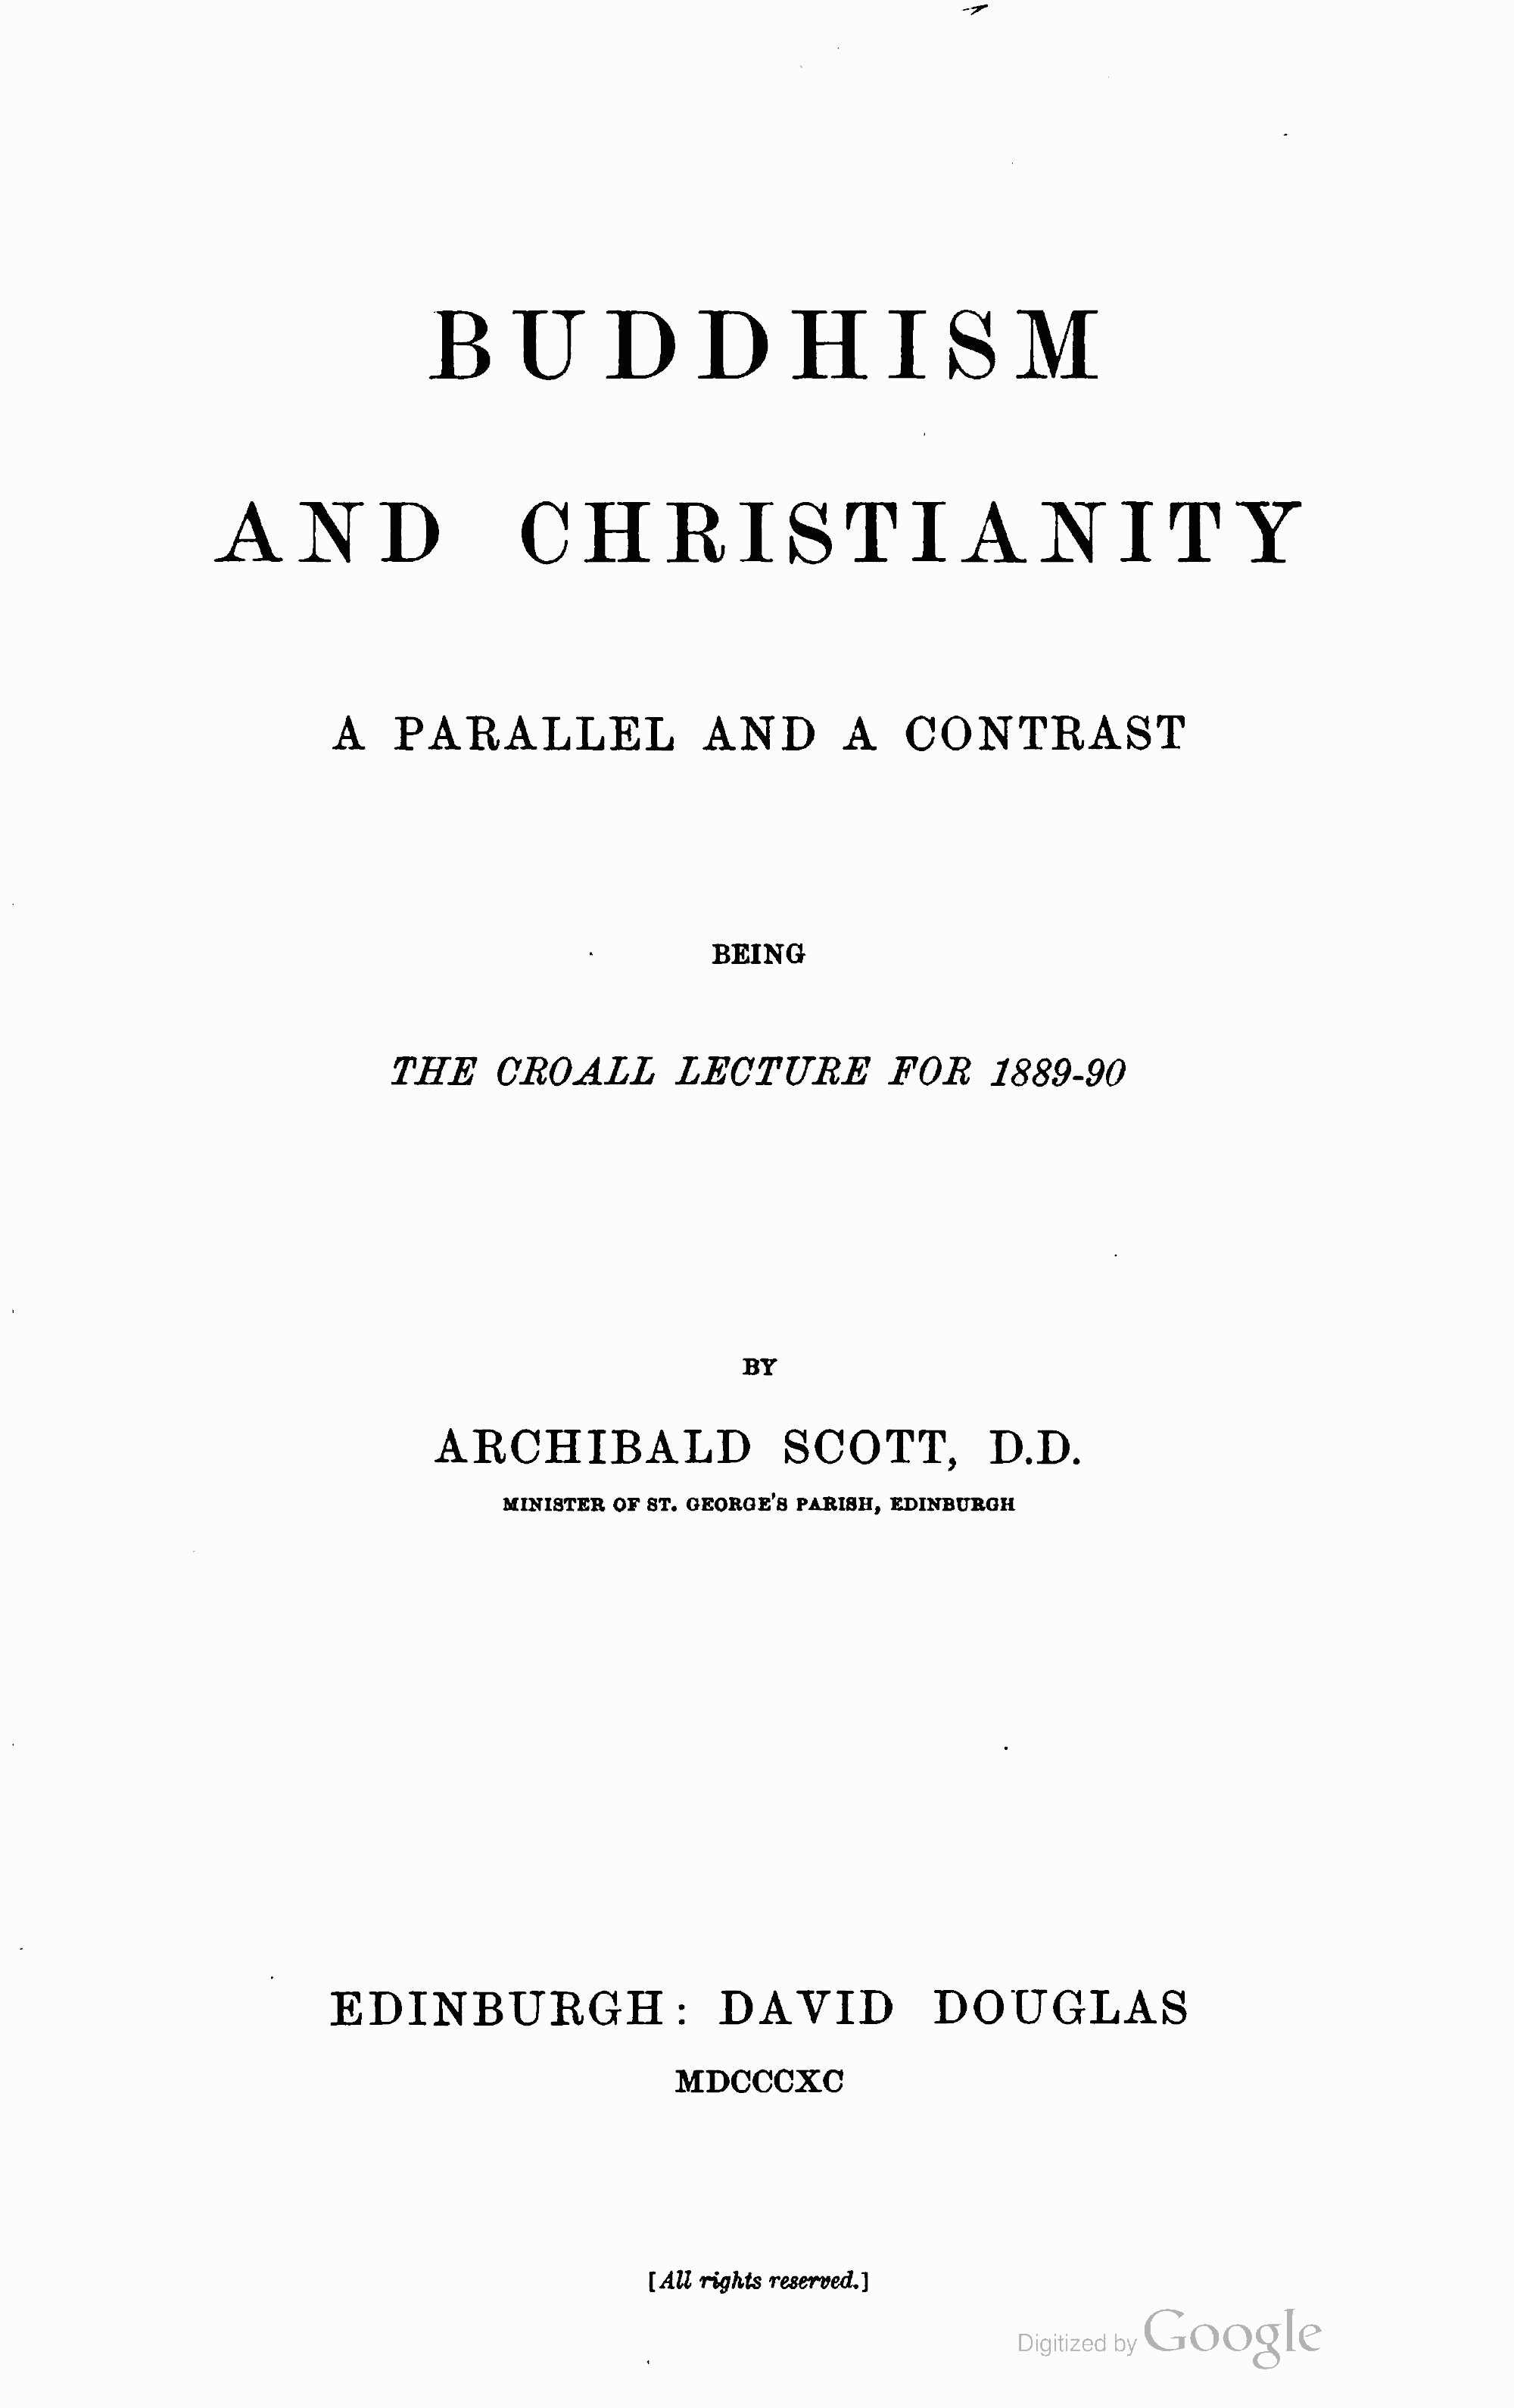 The Project Gutenberg eBook of Buddhism and Christianity, by Archibald Scott